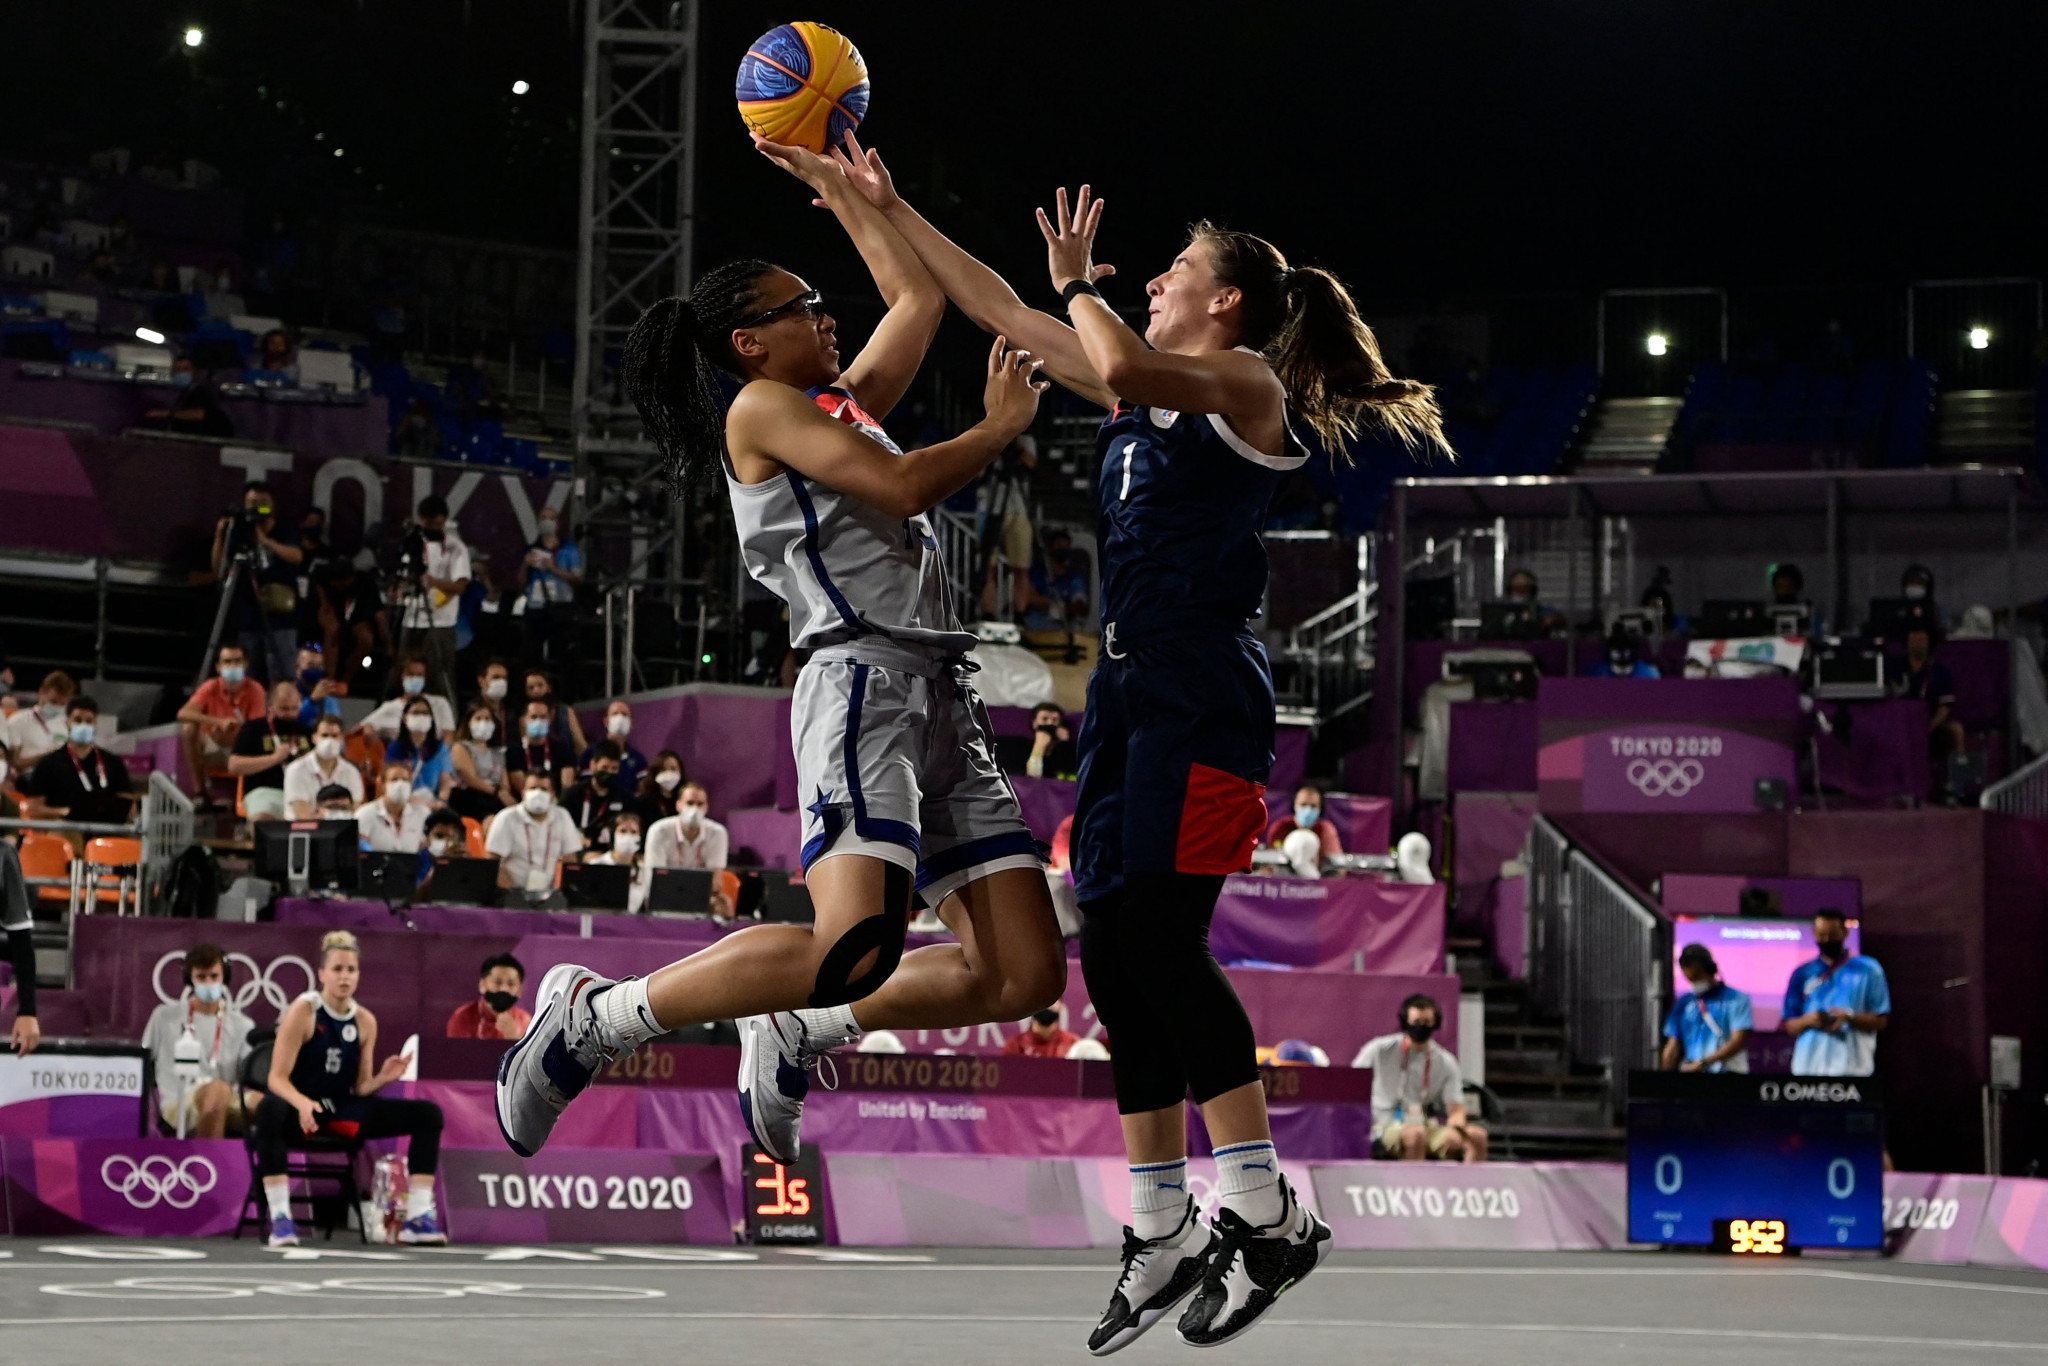 The Olympic debut of 3x3 basketball at Tokyo 2020 has been hailed as a success by FIBA ©Getty Images